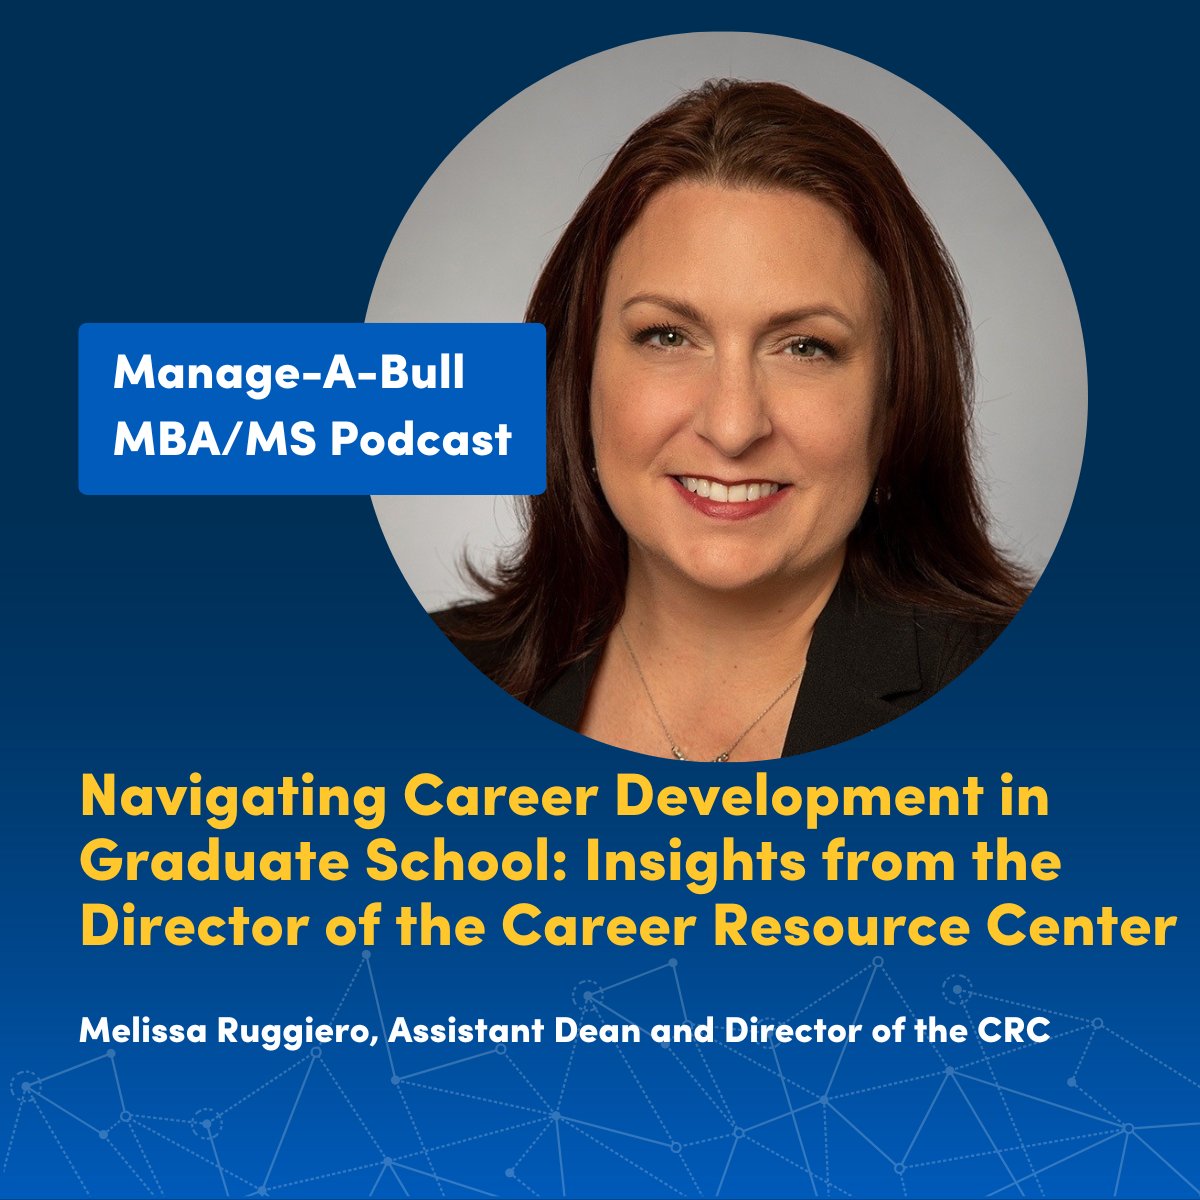 Discover how you can leverage the resources available at the CRC with Melissa Ruggiero in our latest podcast.

Listen on Apple - ms.spr.ly/6013c4c5N

Spotify - ms.spr.ly/6014c4c54

#UBuffalo #UBMgt #AceTheInterview